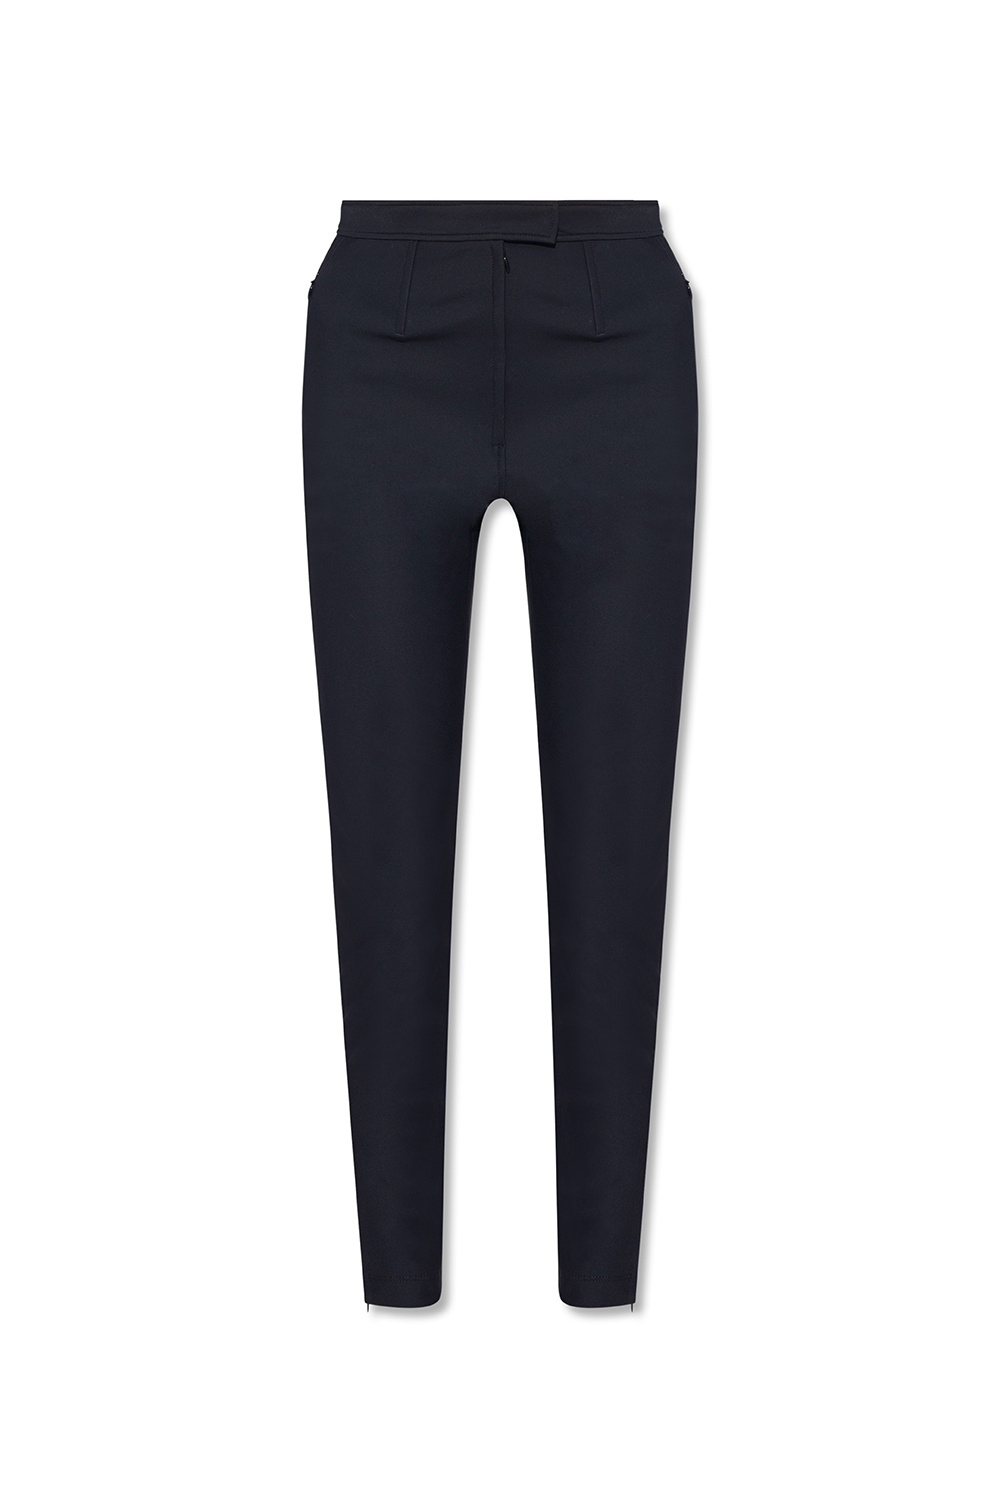 Alexander Wang trousers With with hidden zippers